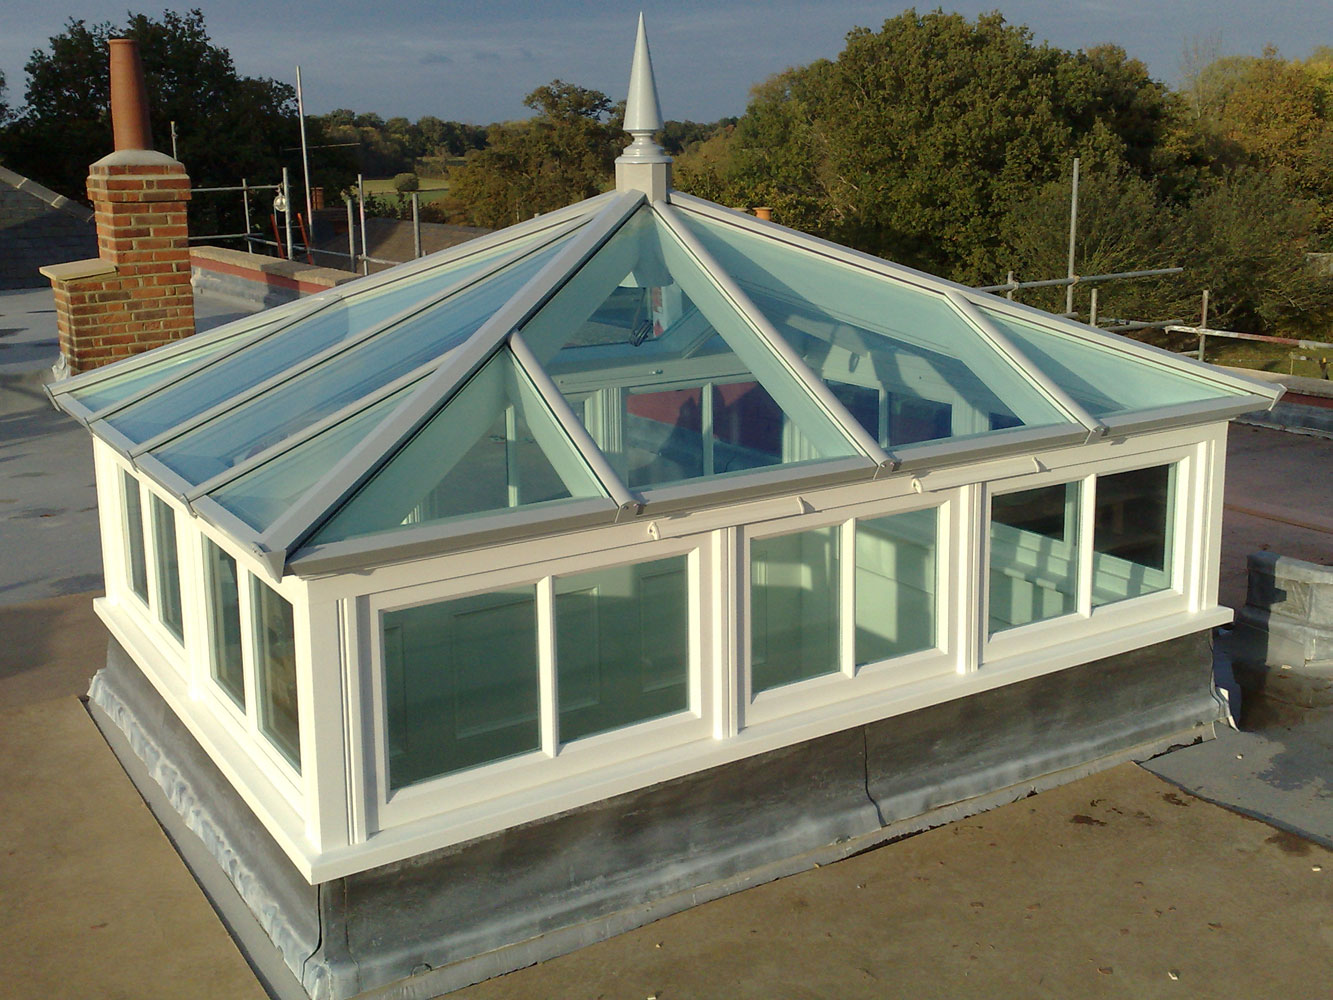 Roof lantern with side frames and soft tint glass